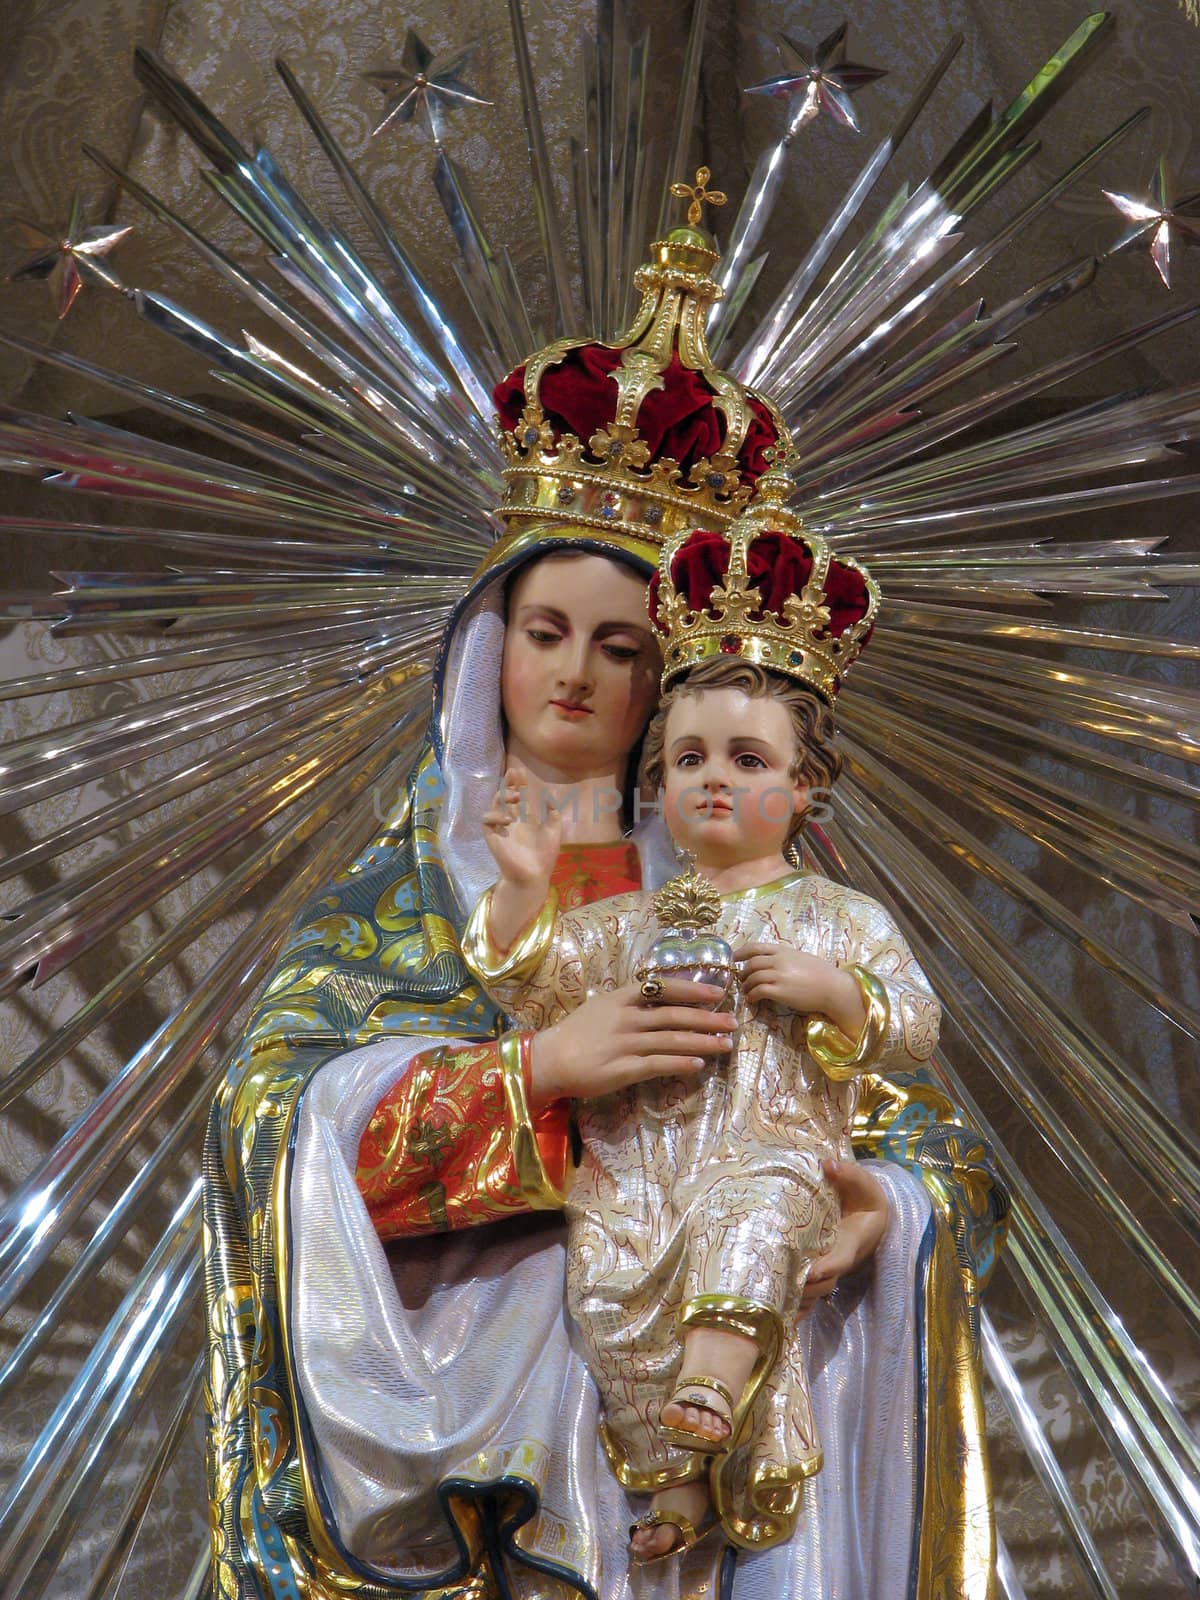 A detail of the statue of Our Lady of The Sacred Heart of Jesus in Sliema, Malta.